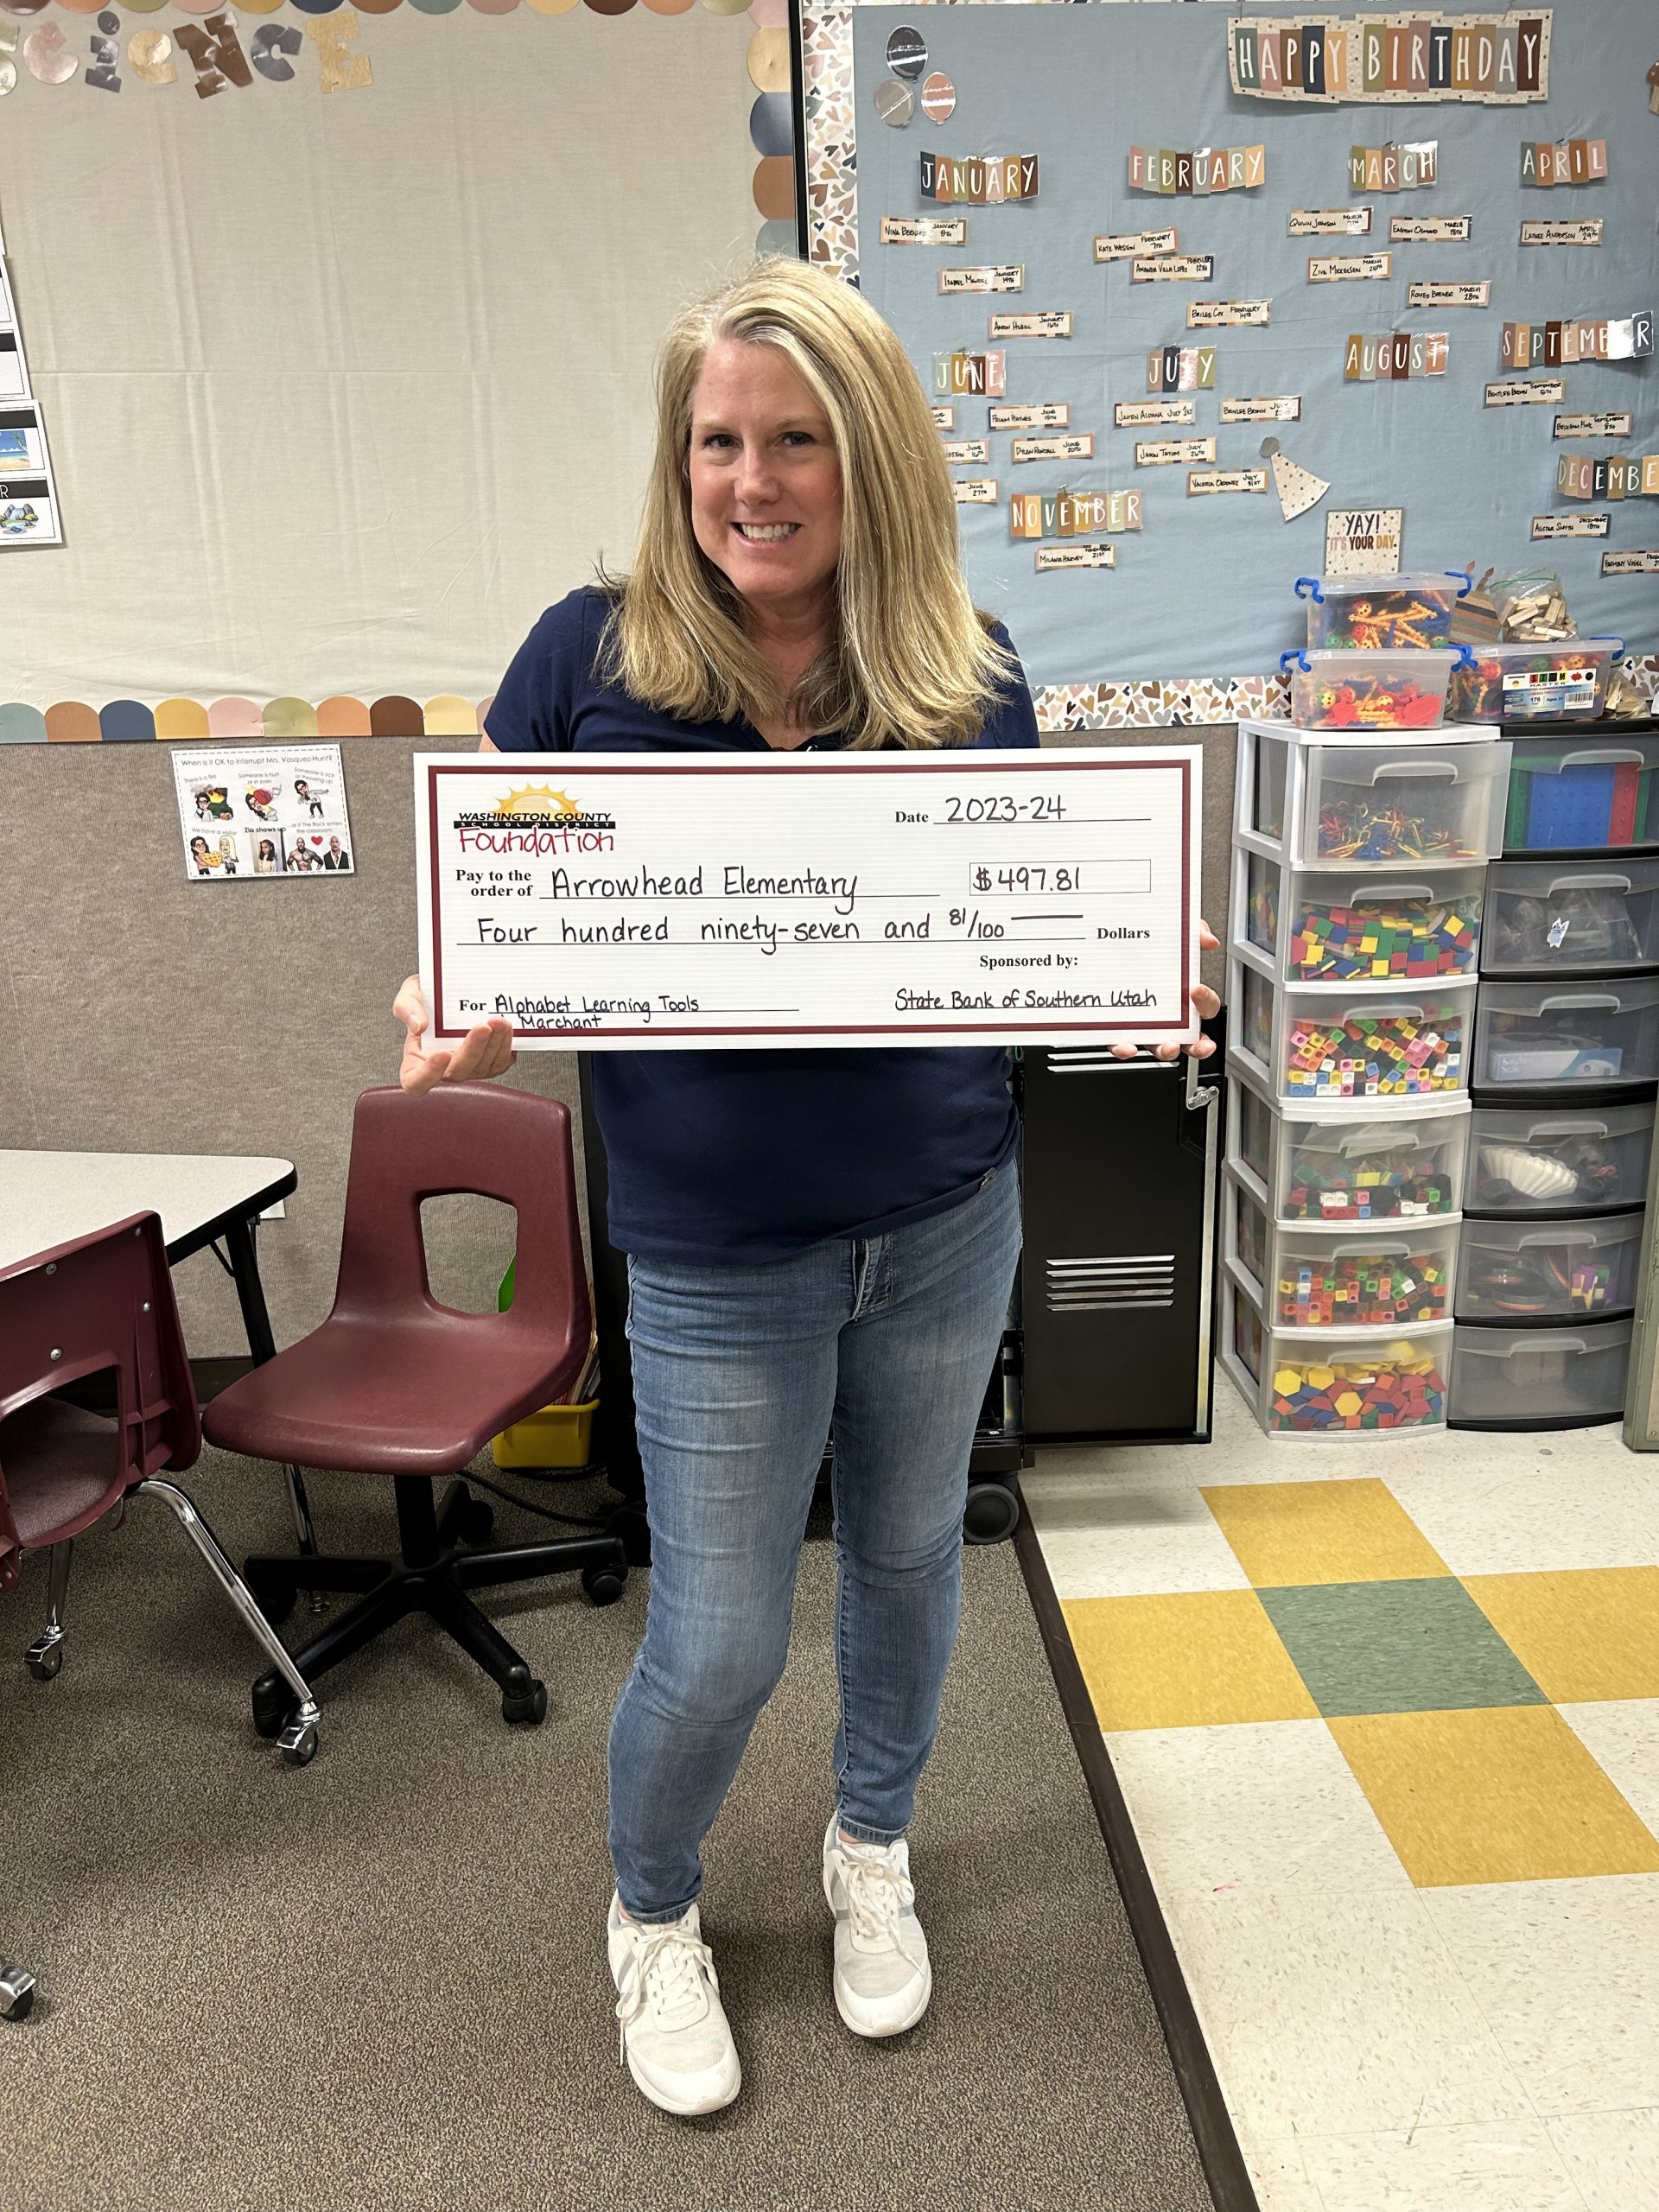 Mrs. Marchant received a Foundation Grant for the 2023-24 school year. Thank you, State Bank of Southern Utah, for the alphabet learning tools.